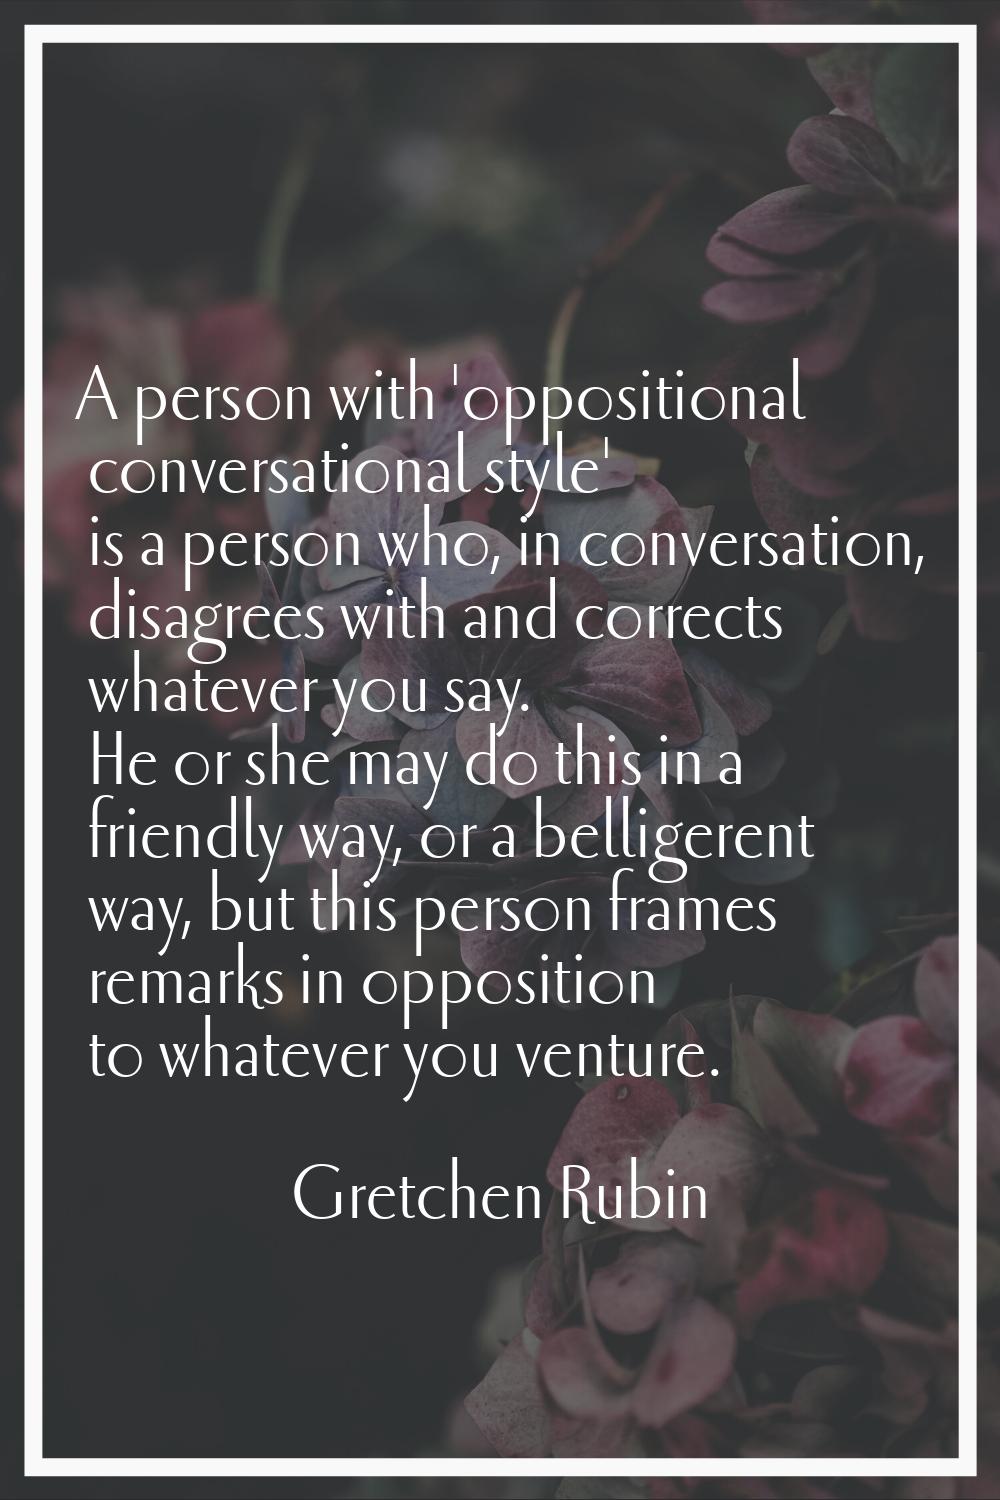 A person with 'oppositional conversational style' is a person who, in conversation, disagrees with 